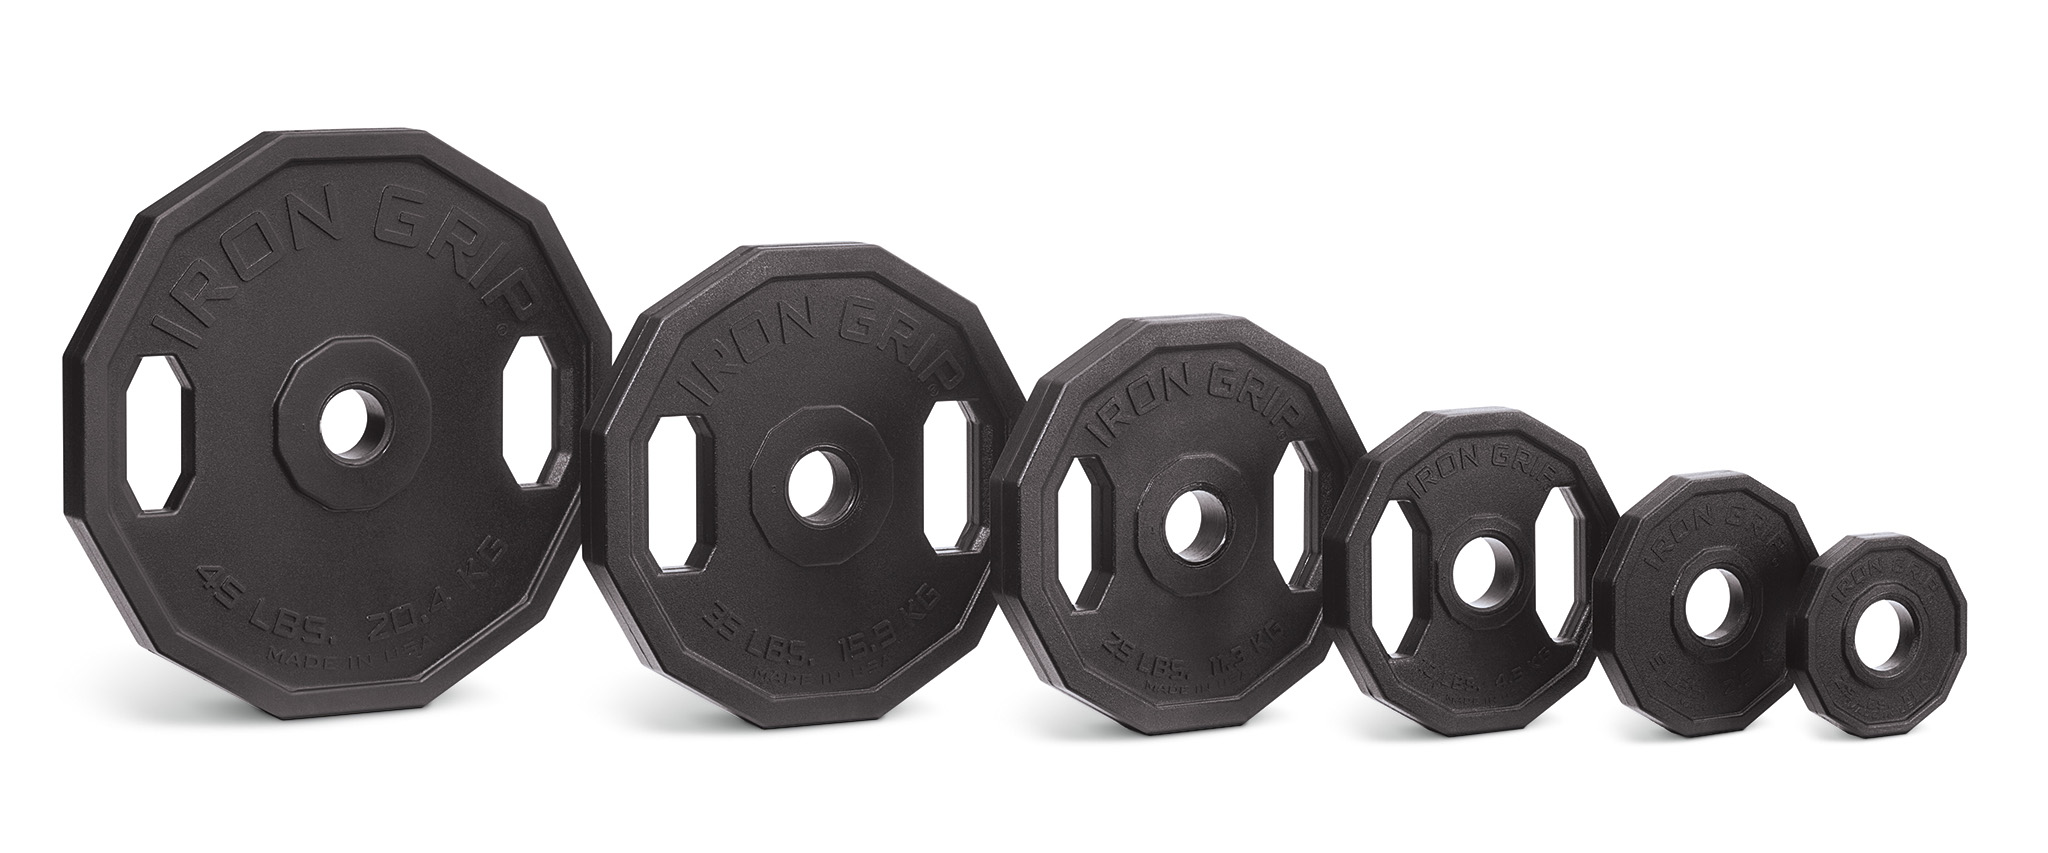 100's of lbs IRON GRIP OLYMPIC WEIGHTS AVAILABLE AMERICAN MADE 35 lb PLATE